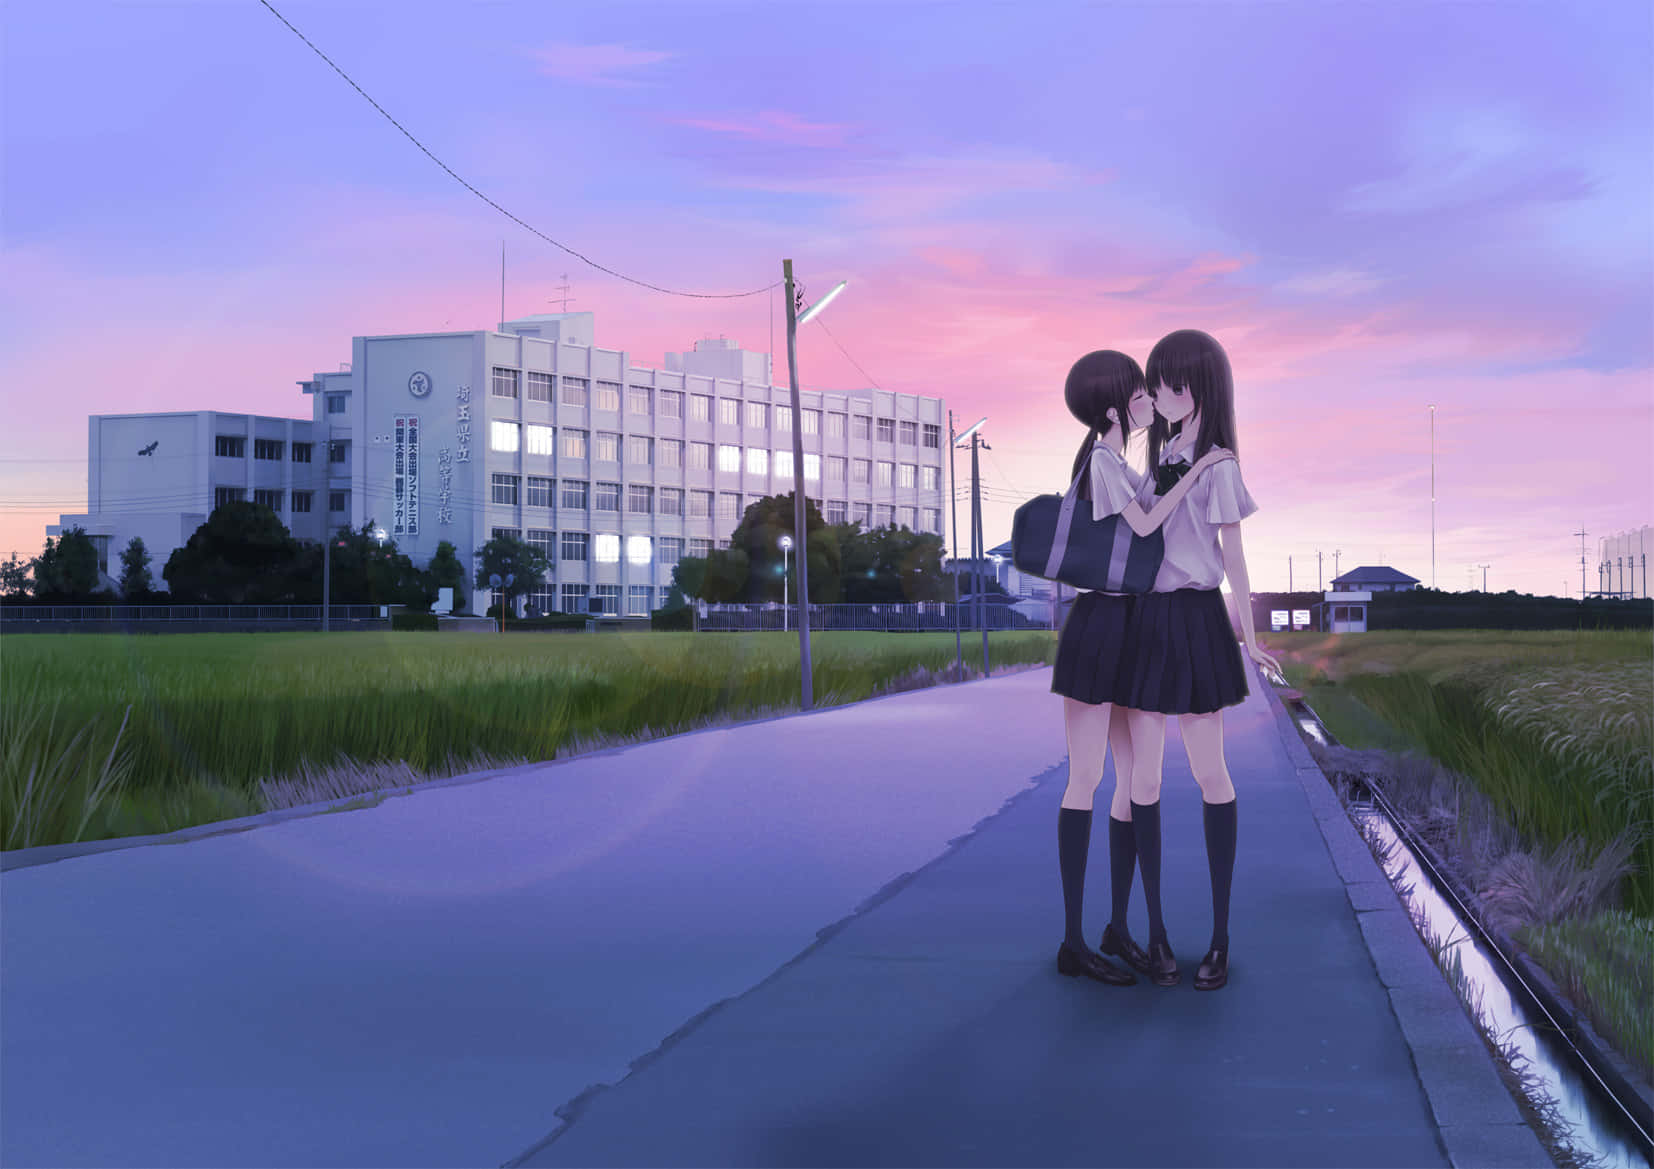 Two Anime Girls Standing On A Road At Sunset